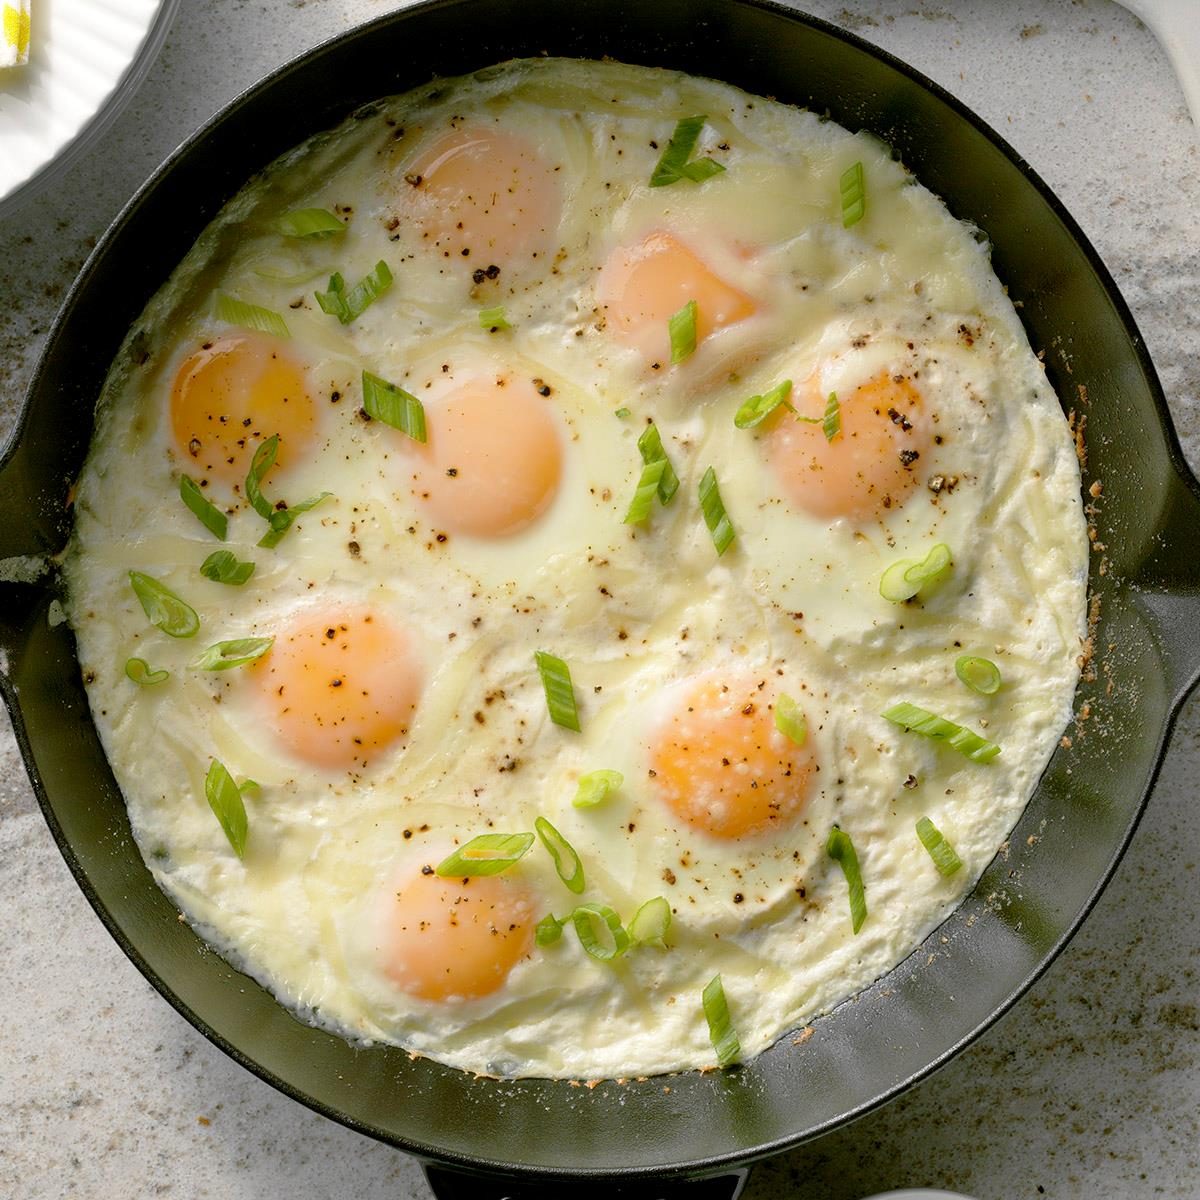 Skillet-Baked Eggs and Ham